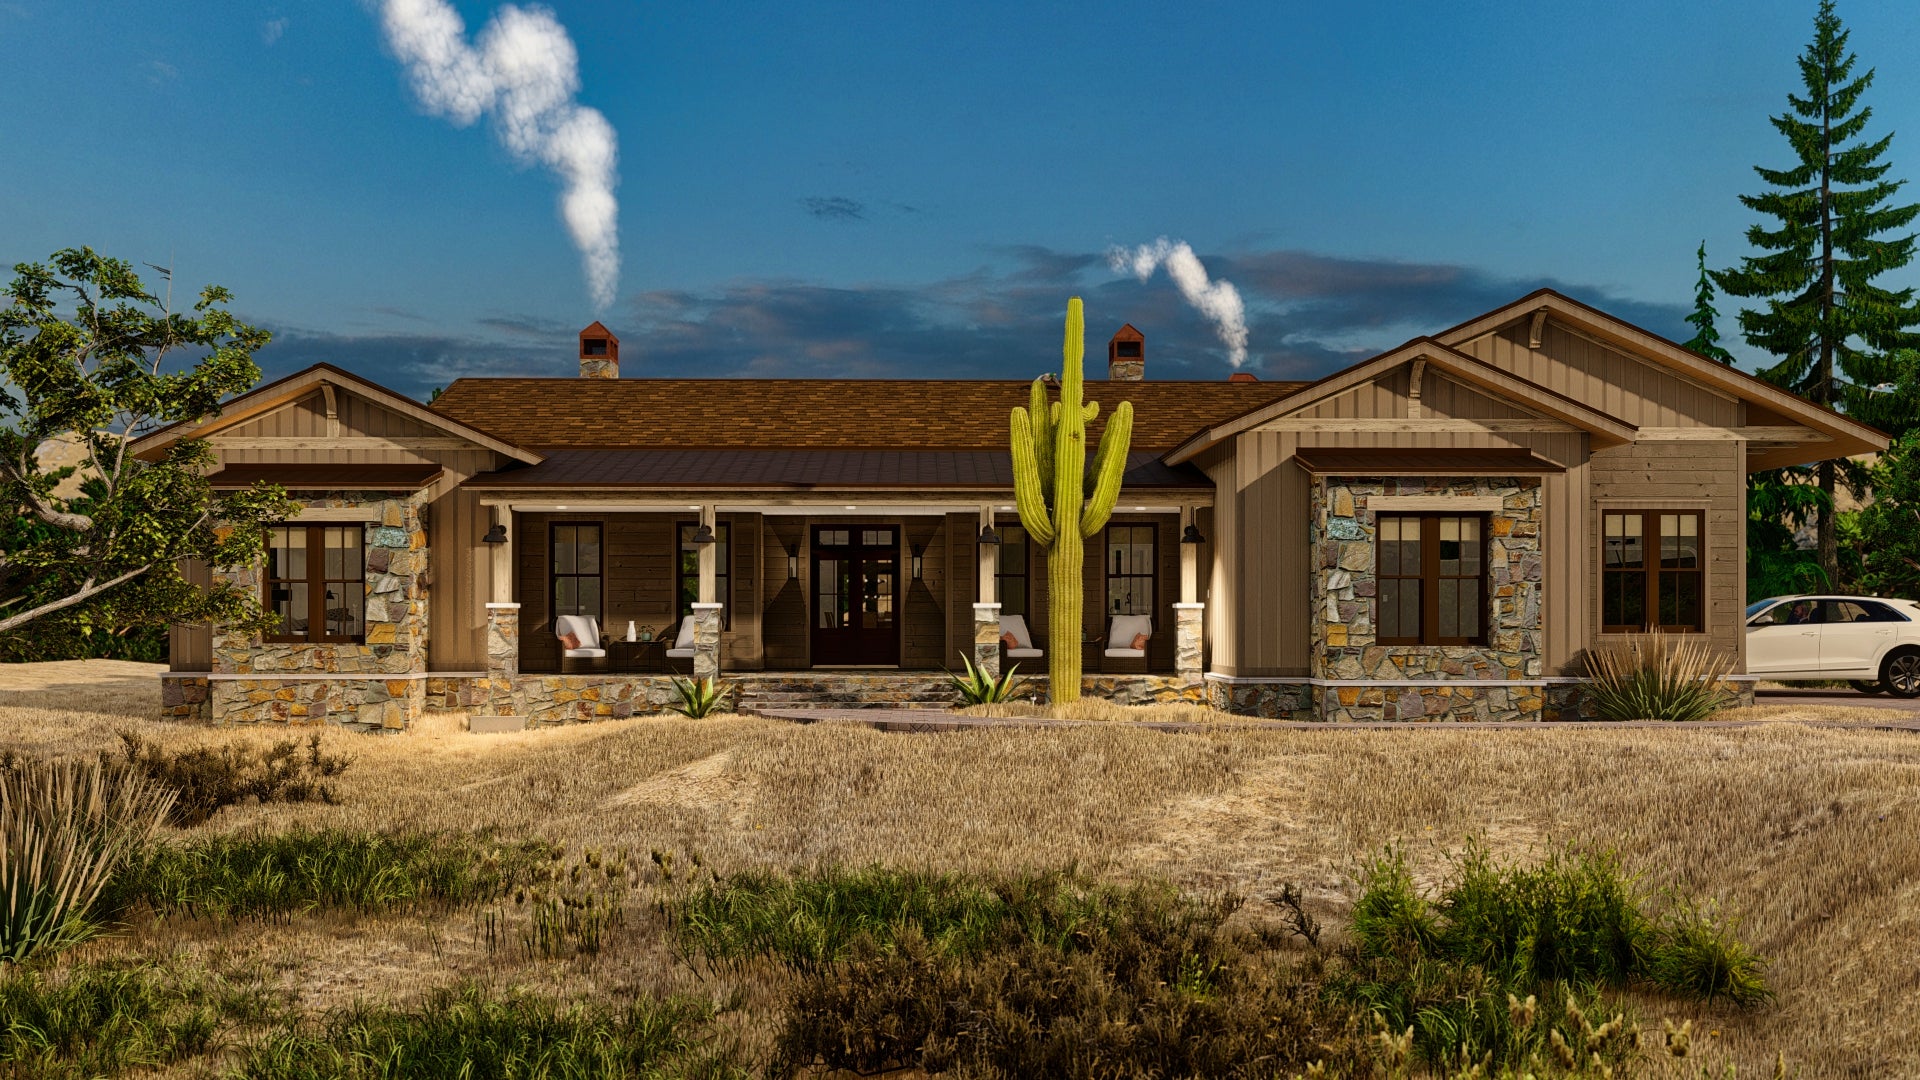 Western Style 3 Bedroom Ranch House Plan